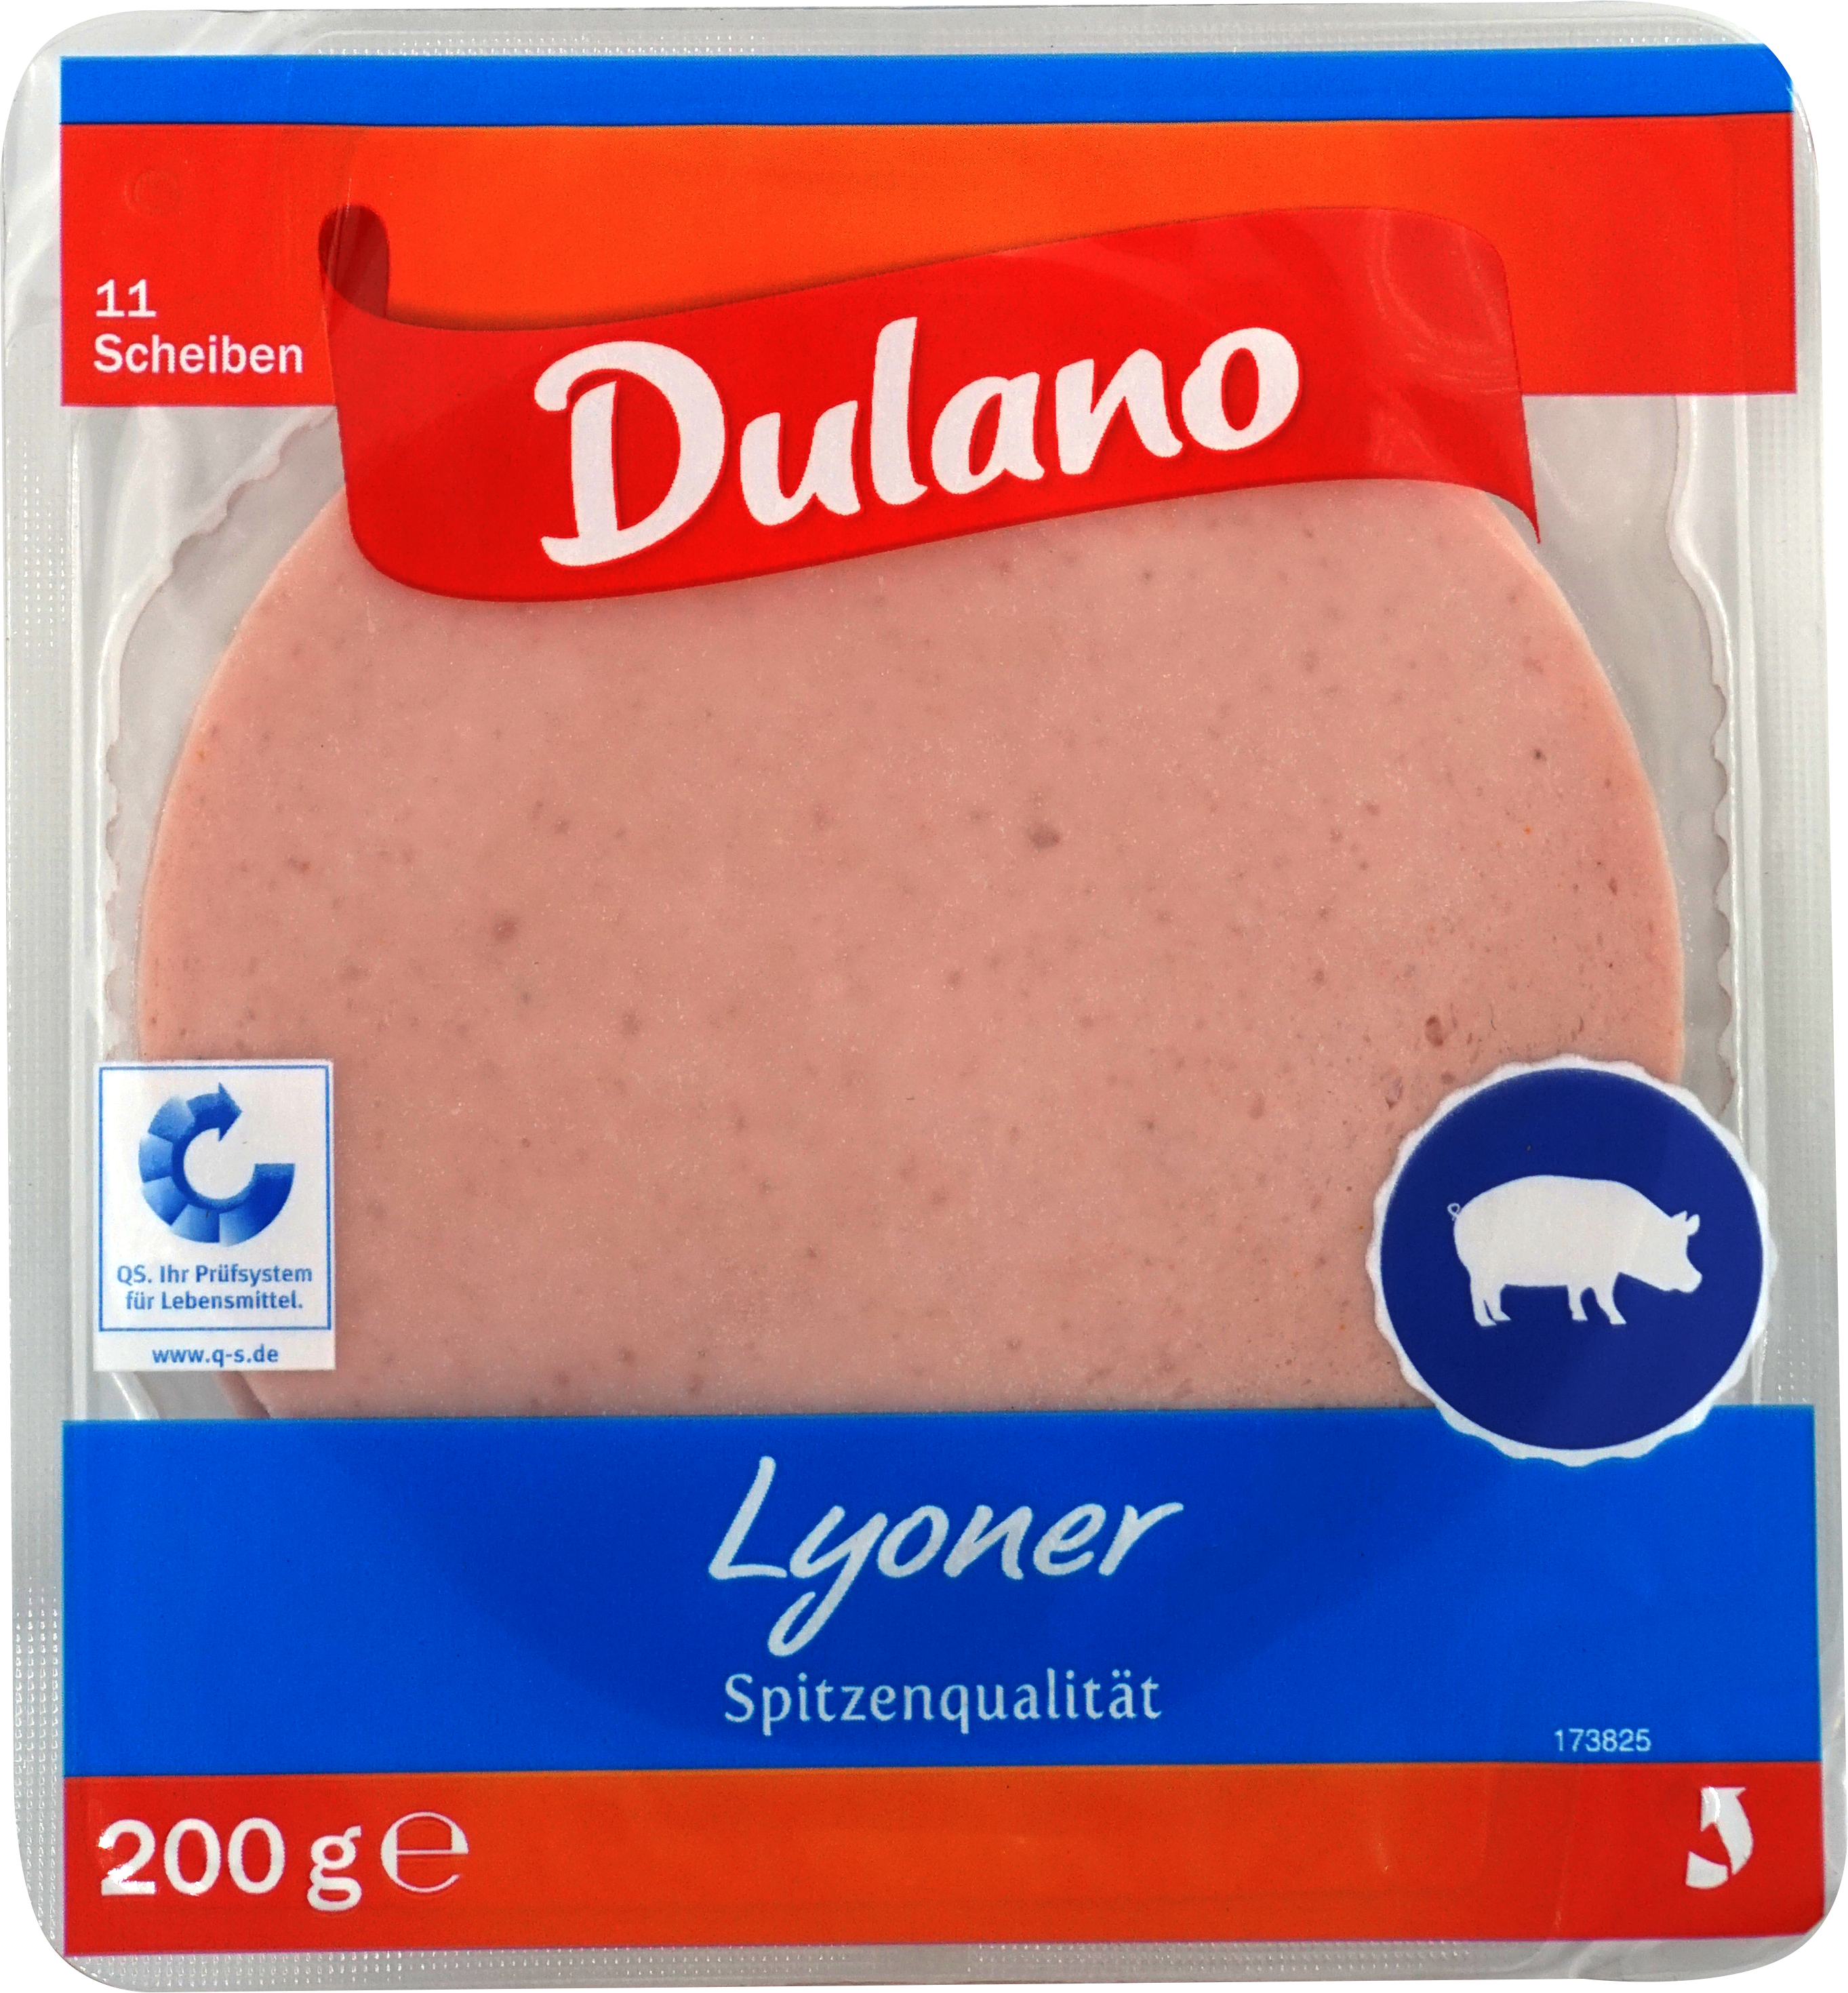 · Sausages (200 Family TFB - - - Dulano · grams) Meat/Poultry/Sausages / The (Lidl) Produktionsstätten Sausages Lyoner Tobacco Butchers Food / Prepared/Processed Meat/Poultry Beverage Nortrup Prepared/Processed Pork Germany GmbH mynetfair